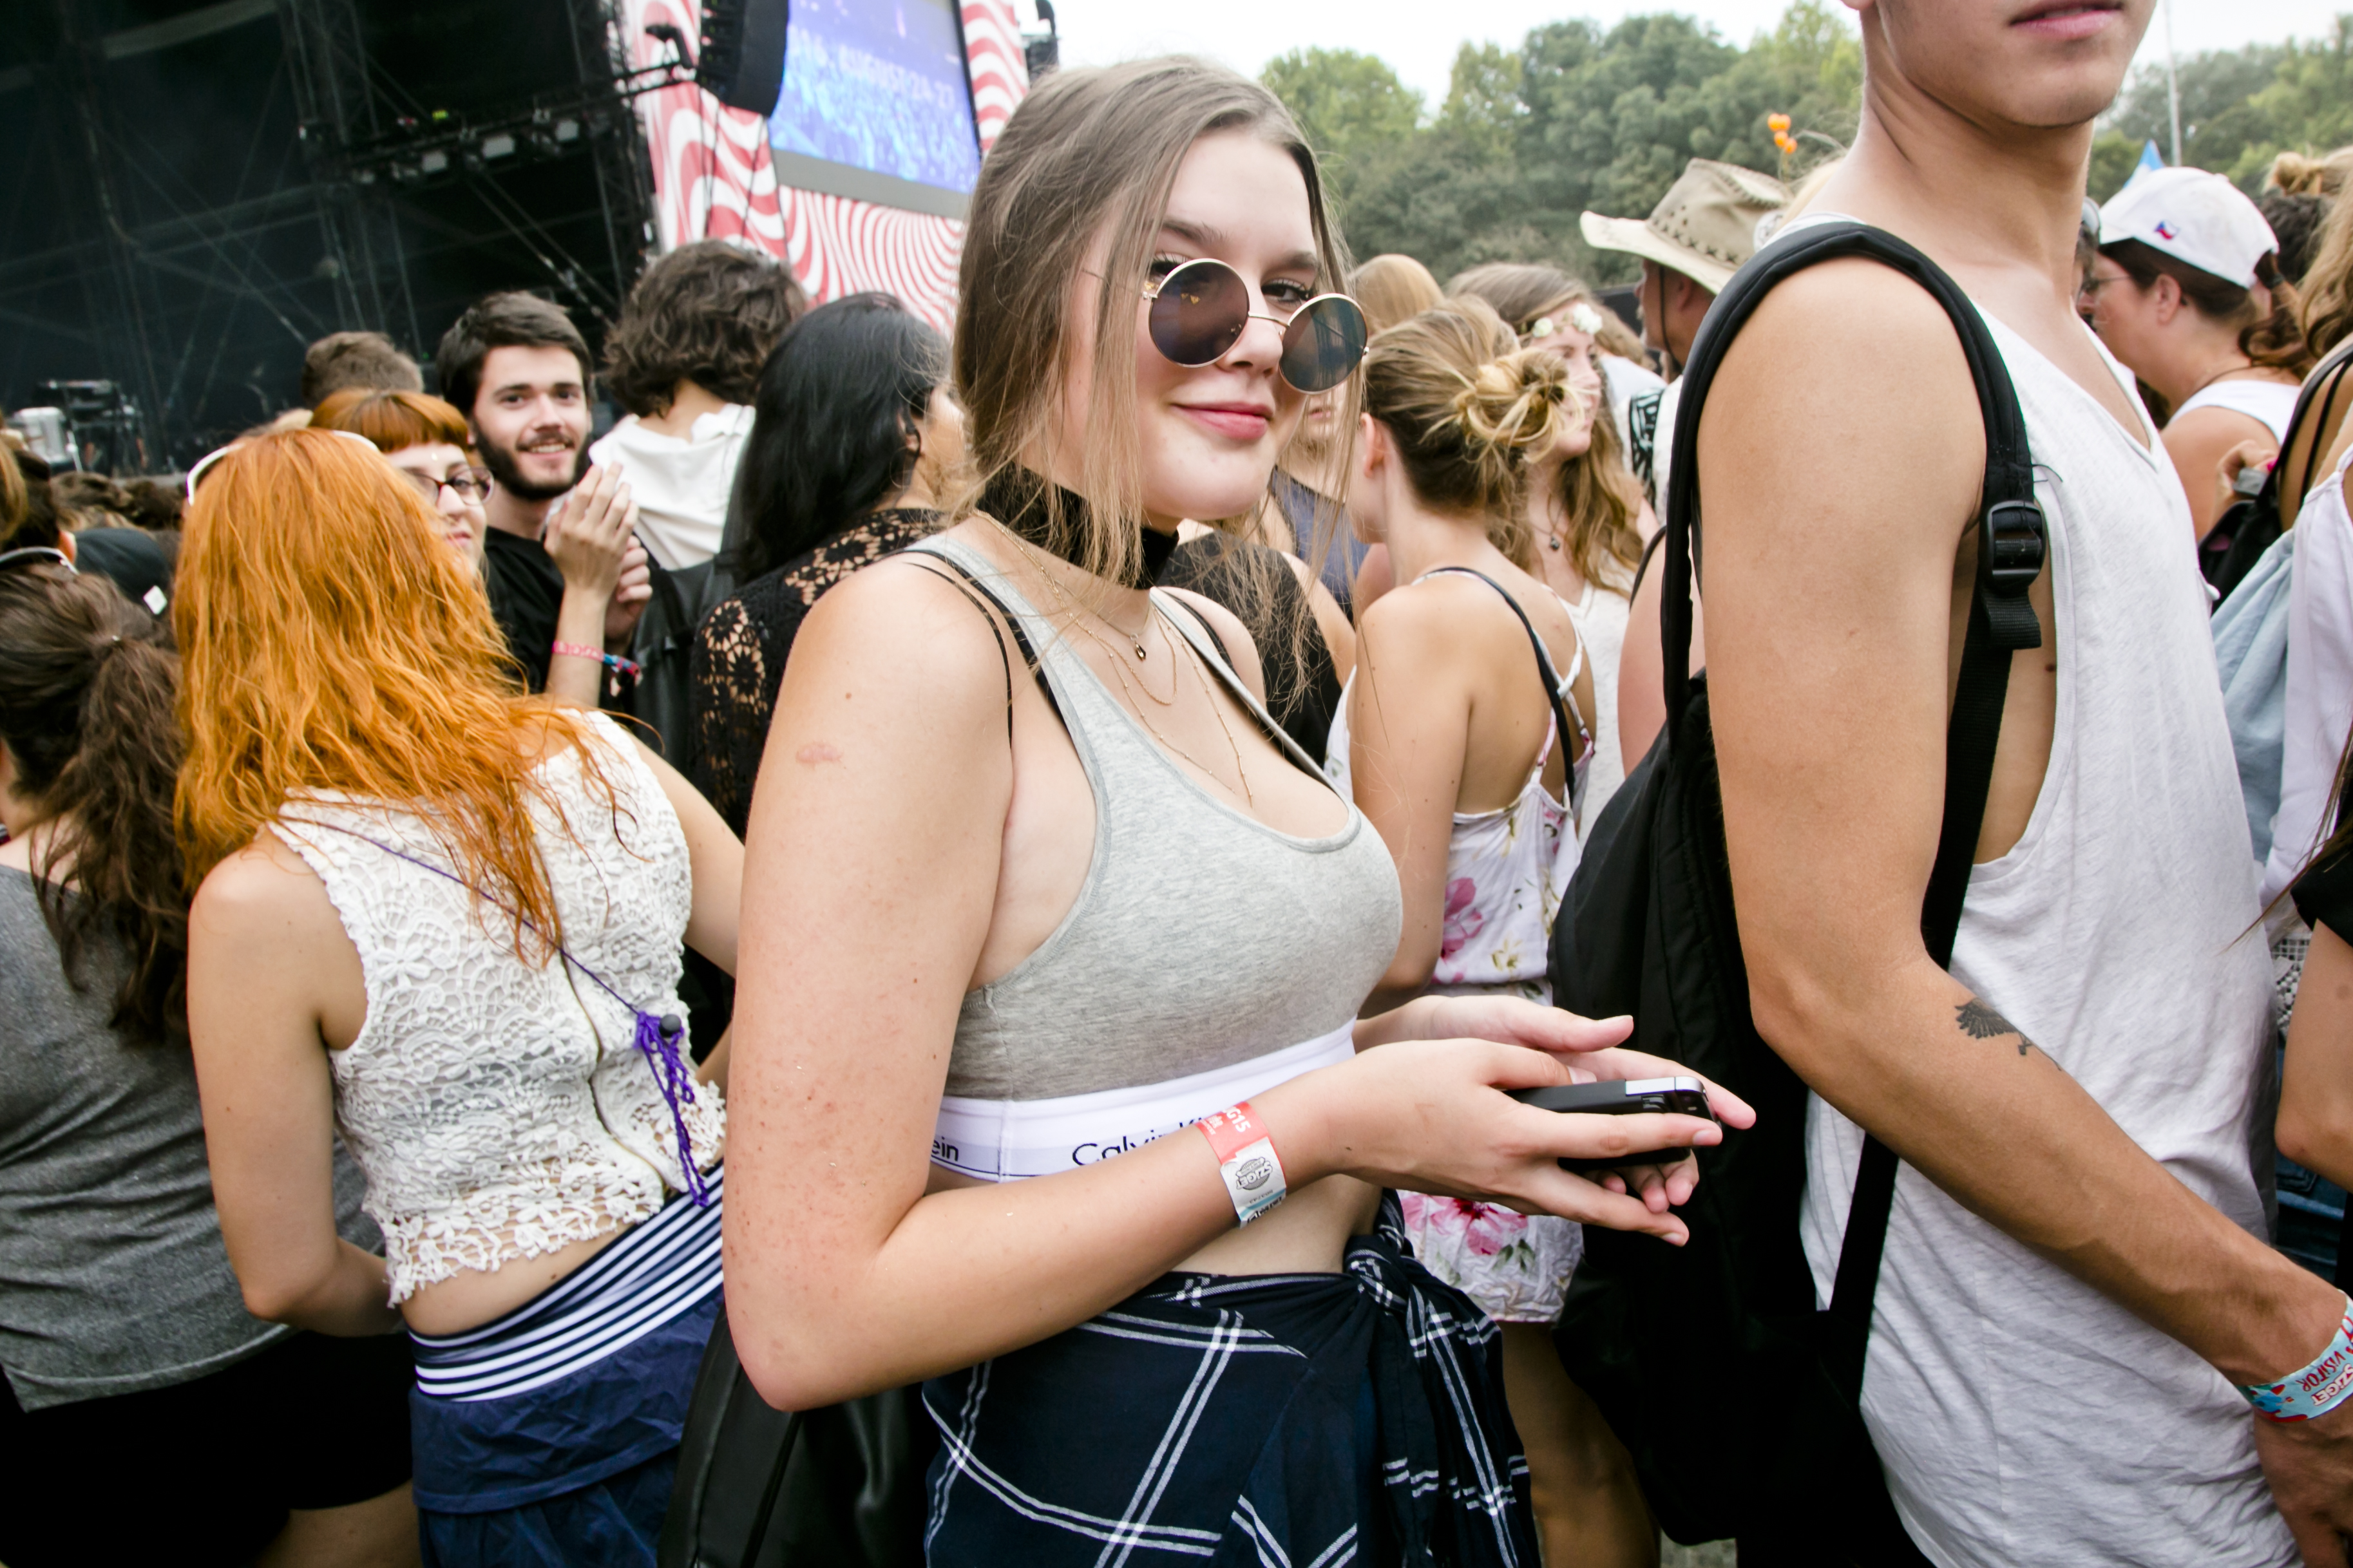 Crowd & Atmosphere at Sziget Festival, Budapest, Hungary - 15 August 2016